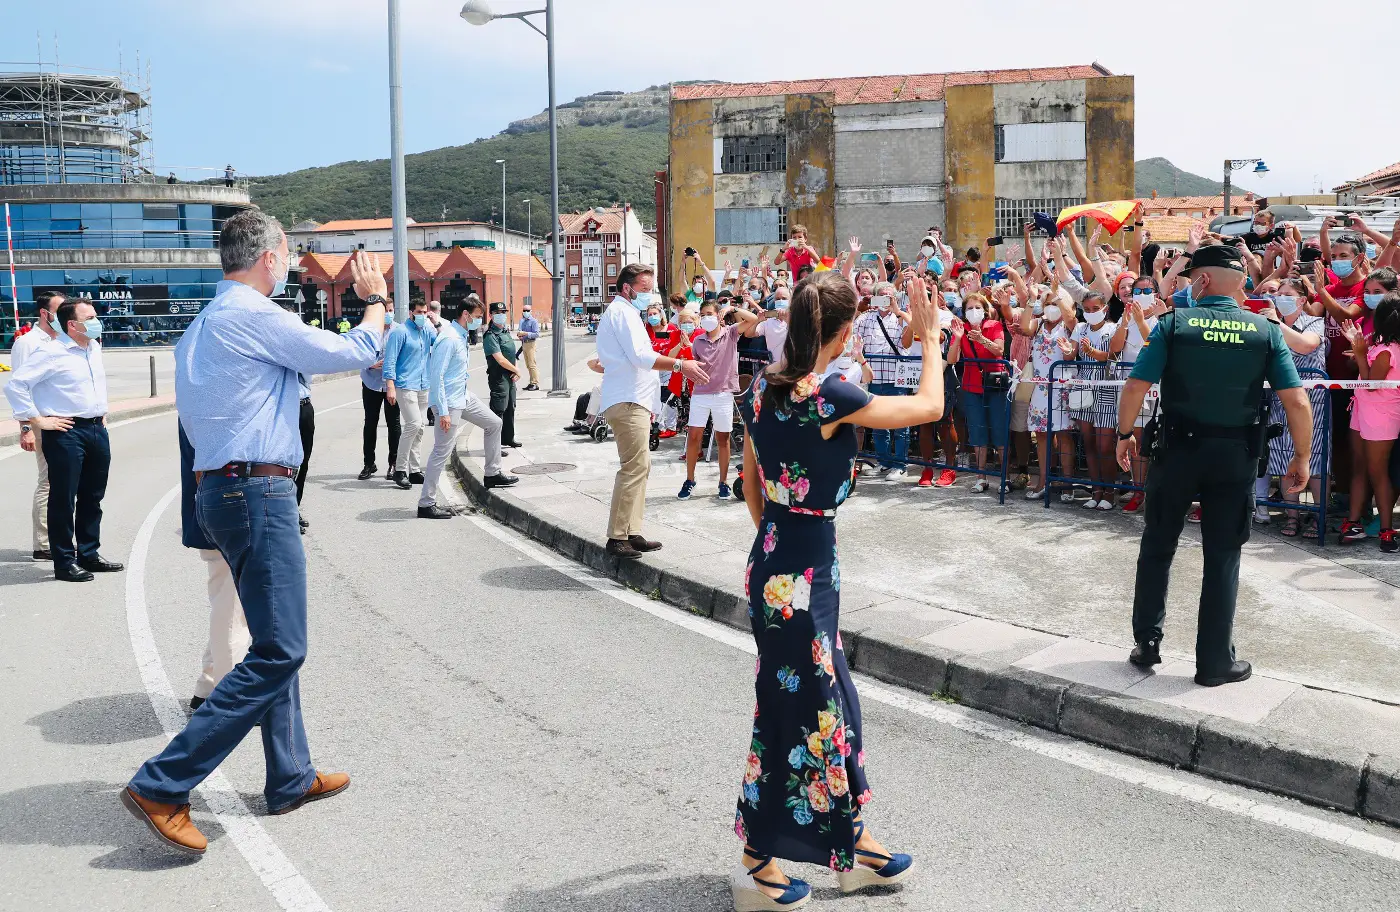 King Felipe and Queen Letizia received warm welcome in Cantabria